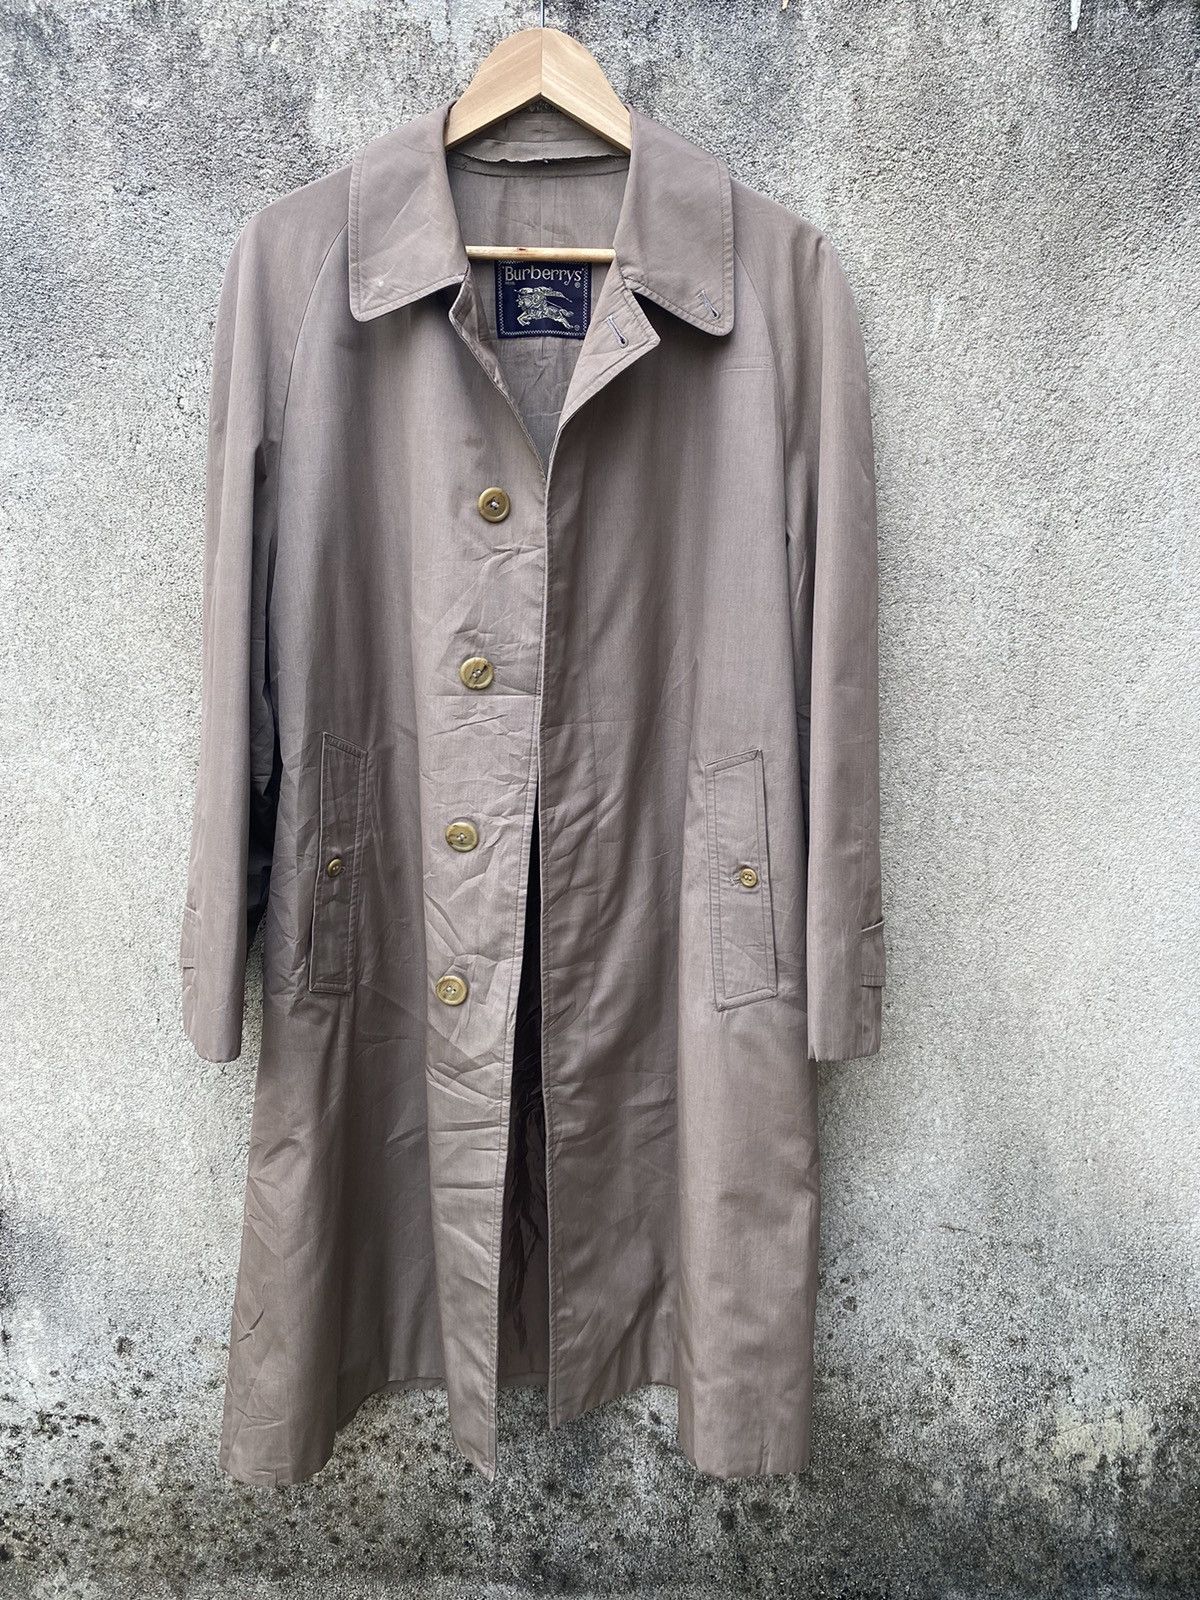 Burberry Trench Coat Single Breasted Jacket - 3